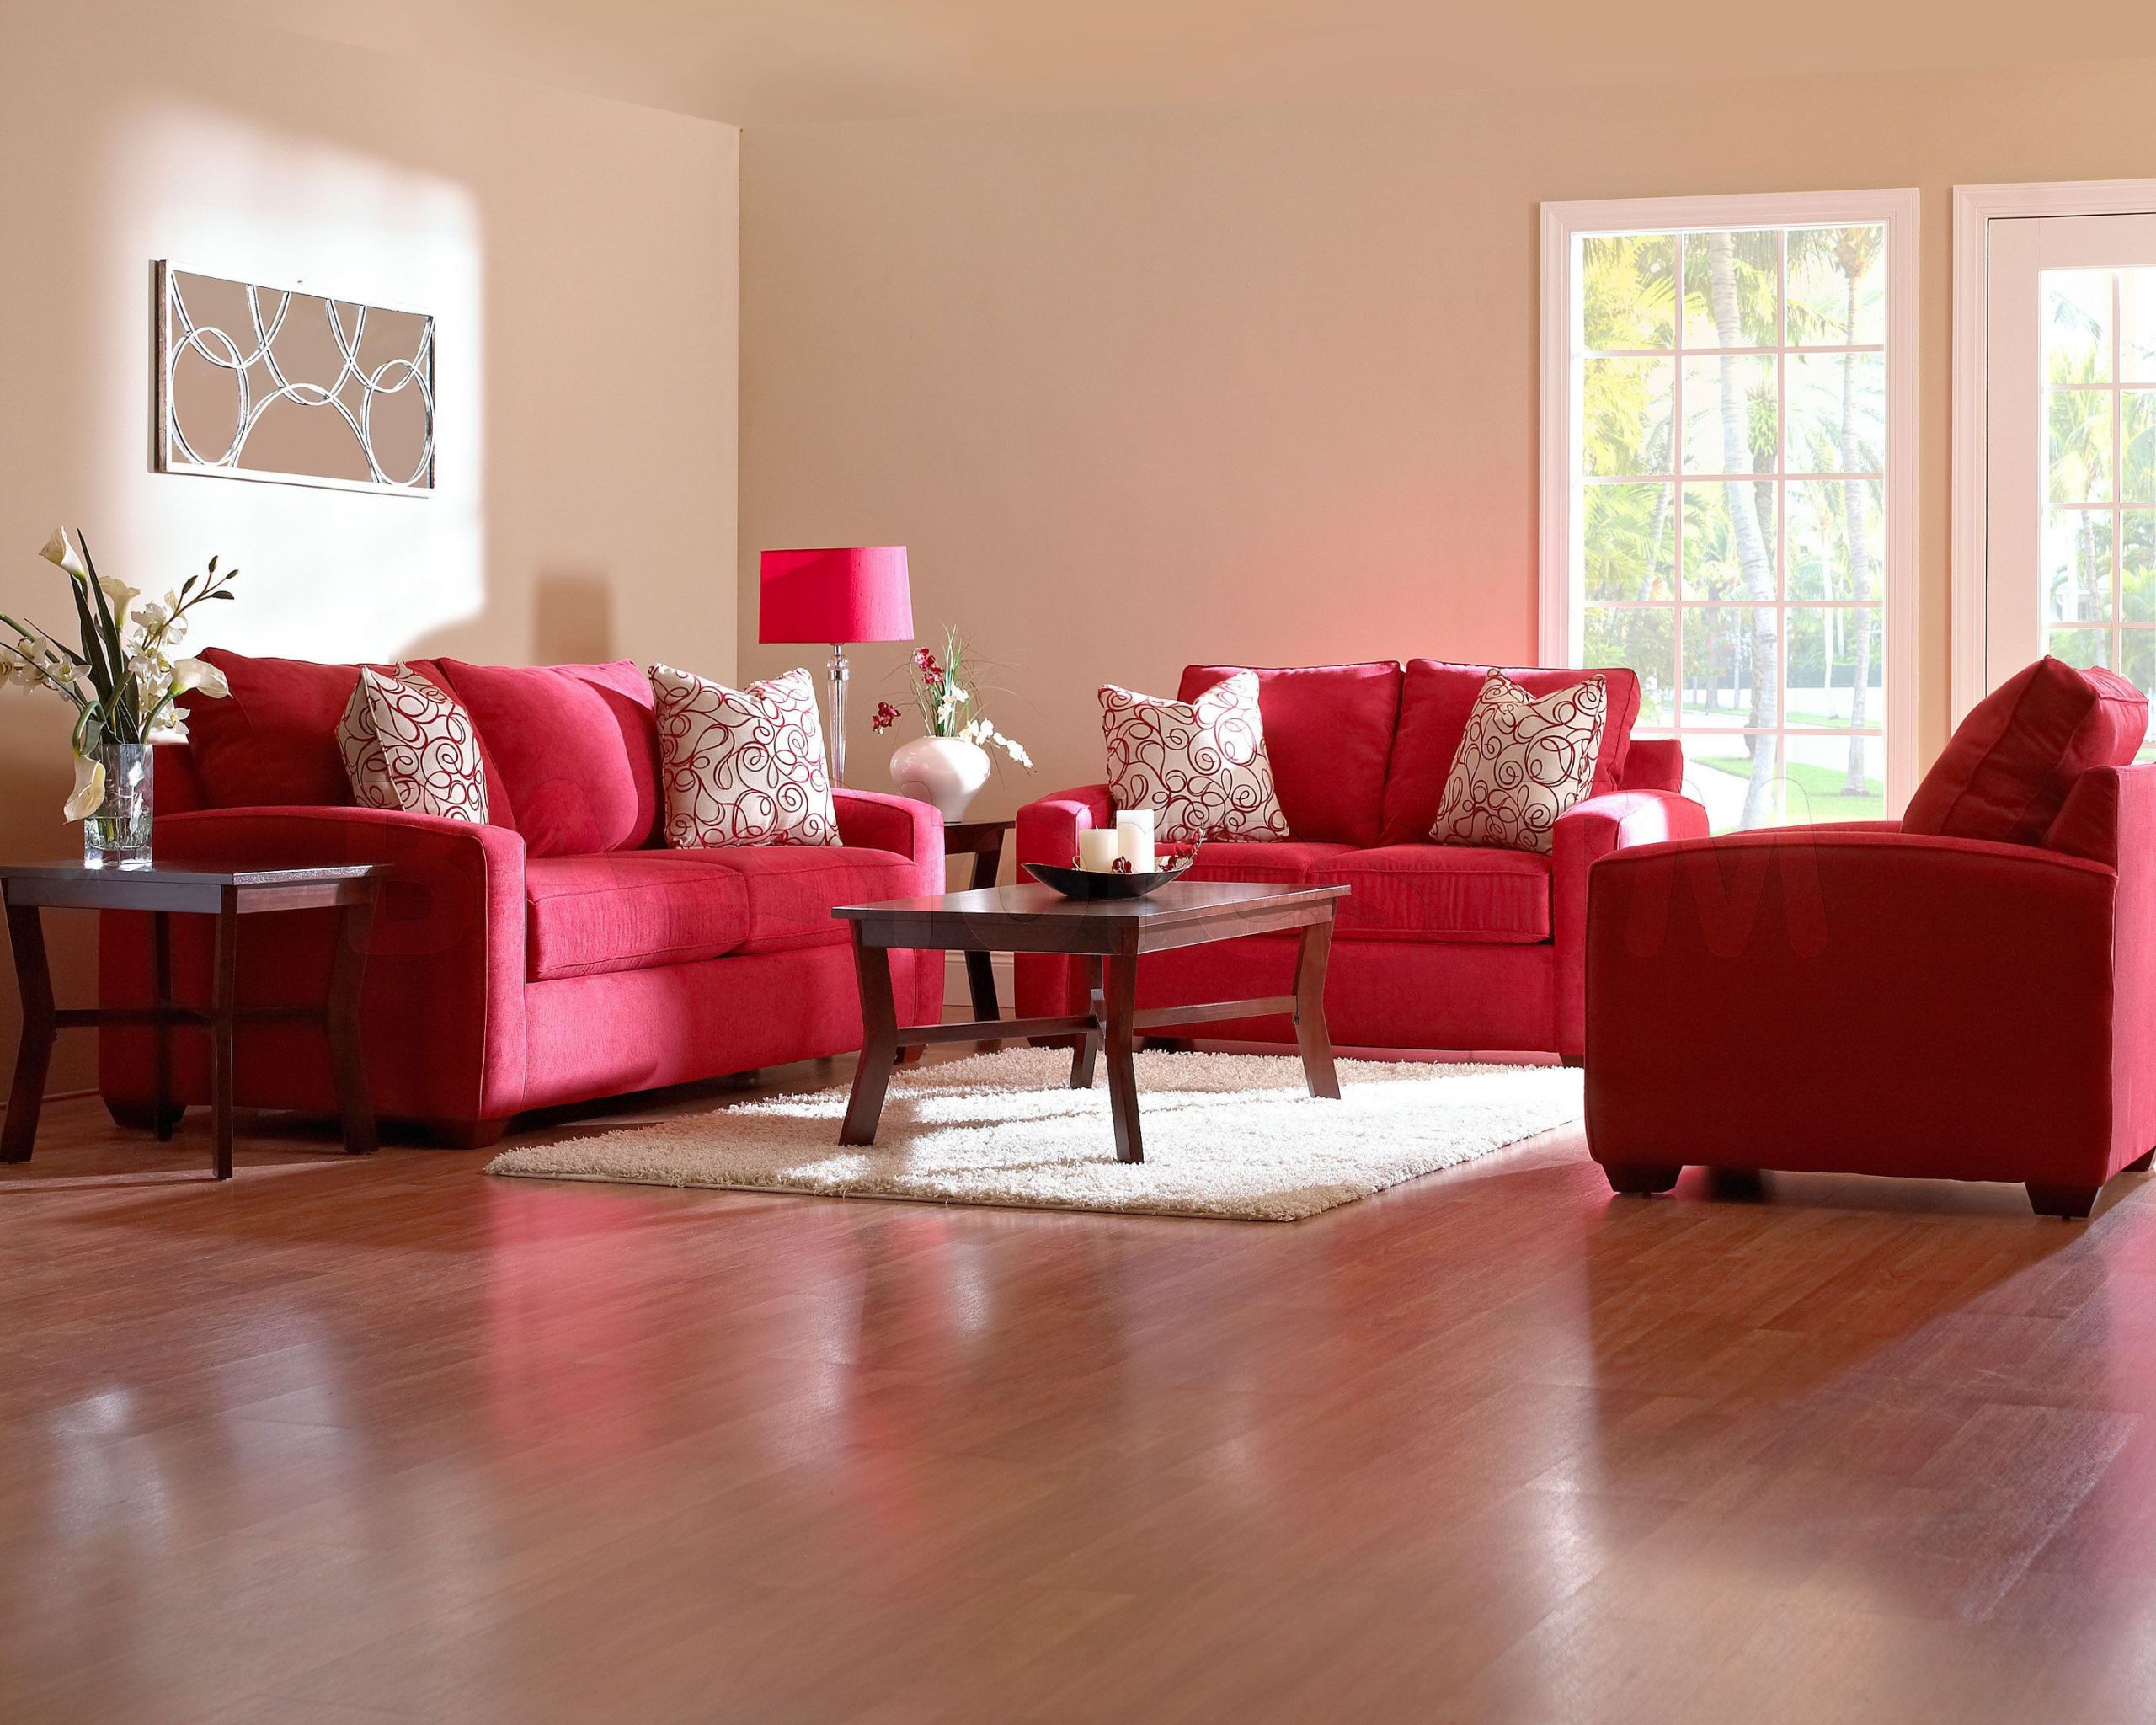 Red Couches Living Room Ideas
 red furniture decorating ideas